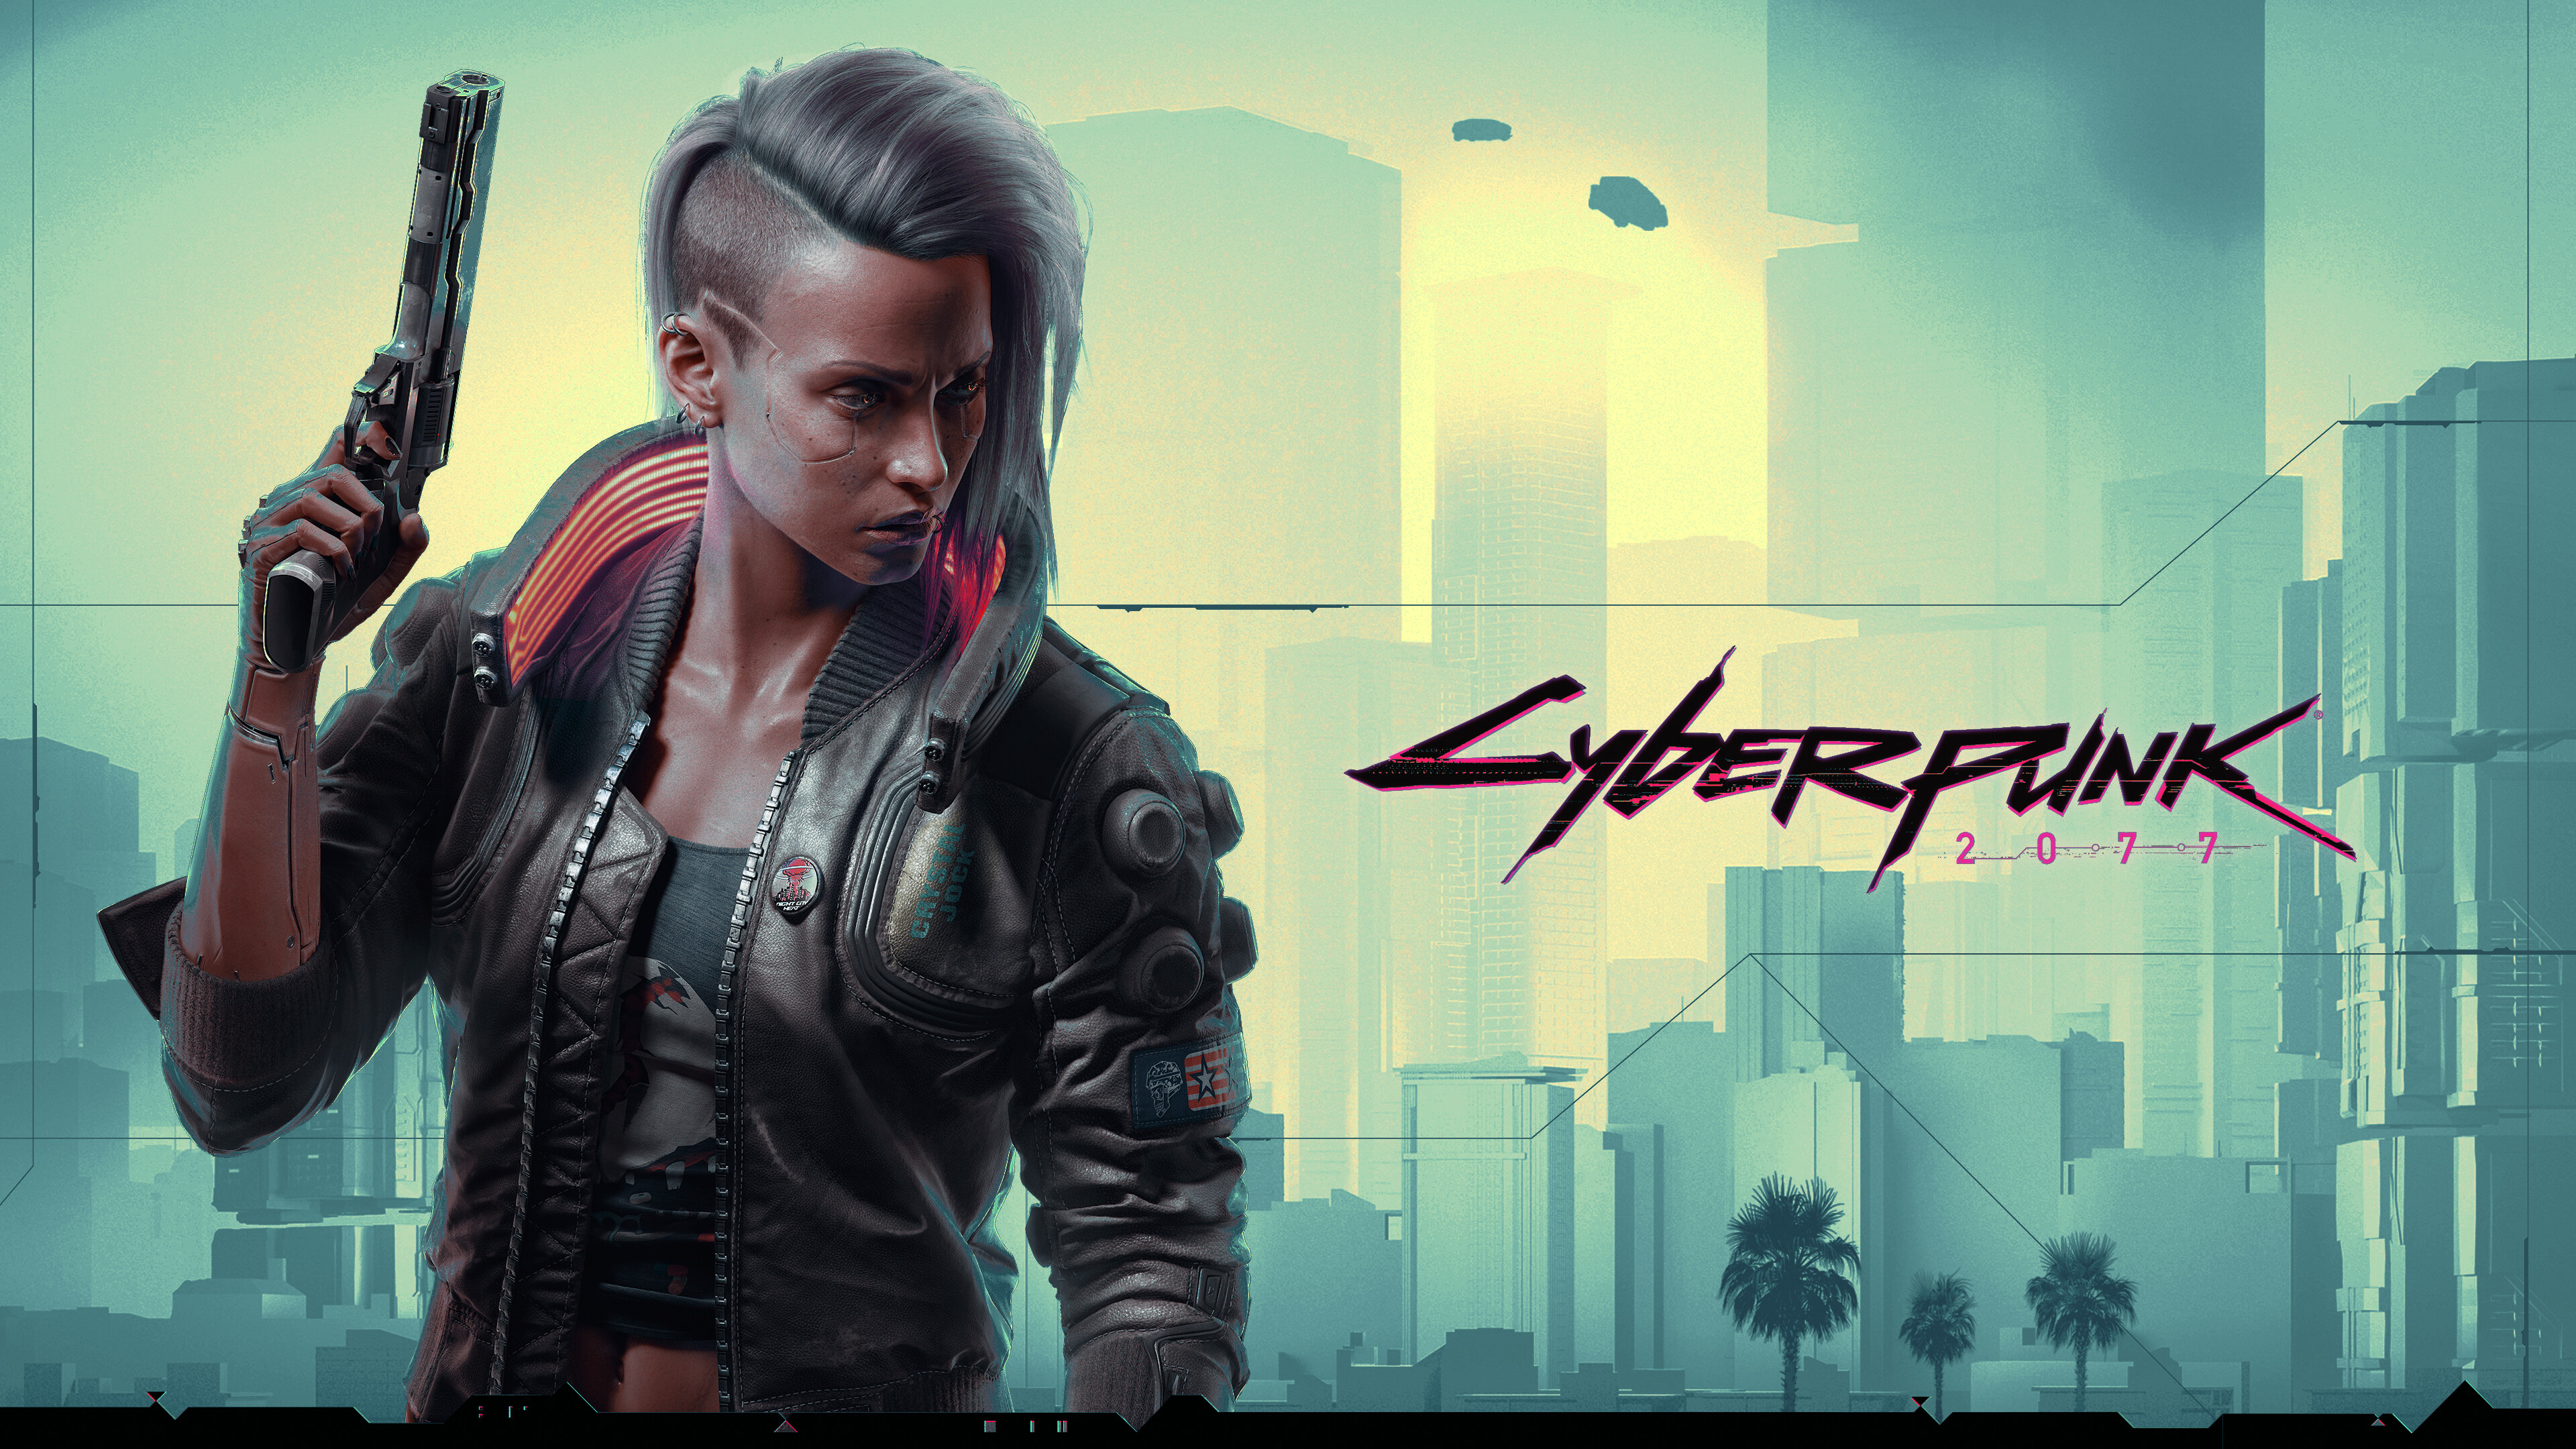 Cyberpunk 2077: V must consult a "ripperdoc" to upgrade and purchase cyberware implants, Black markets offer military-grade abilities. 3840x2160 4K Background.